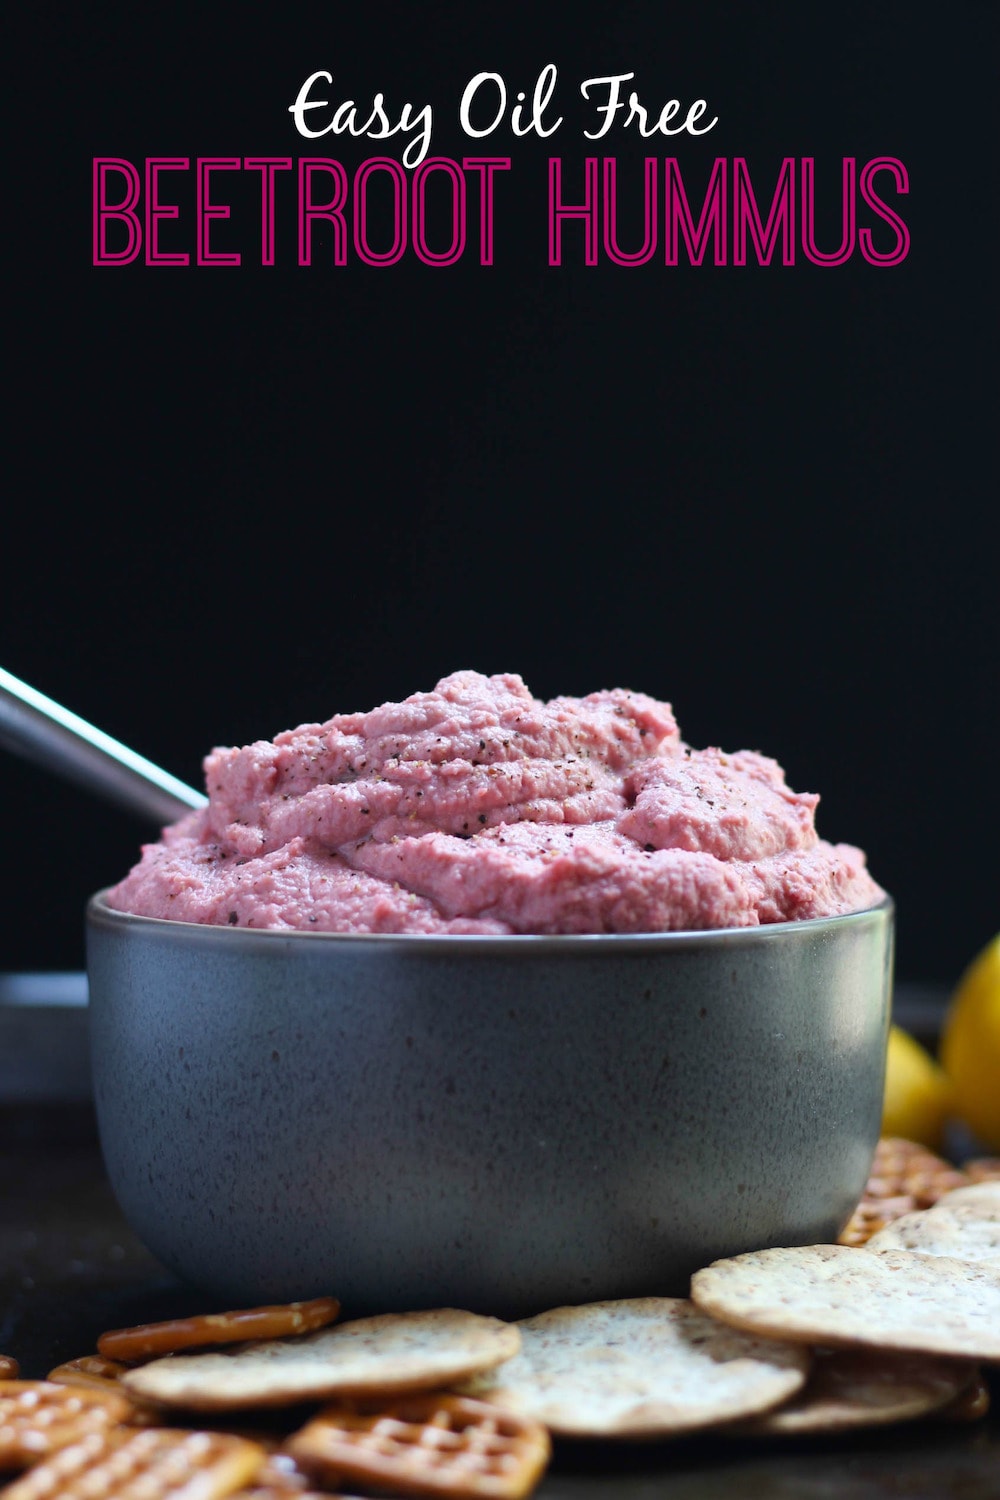 Oil Free Beetroot Hummus Recipe heaped in a bowl